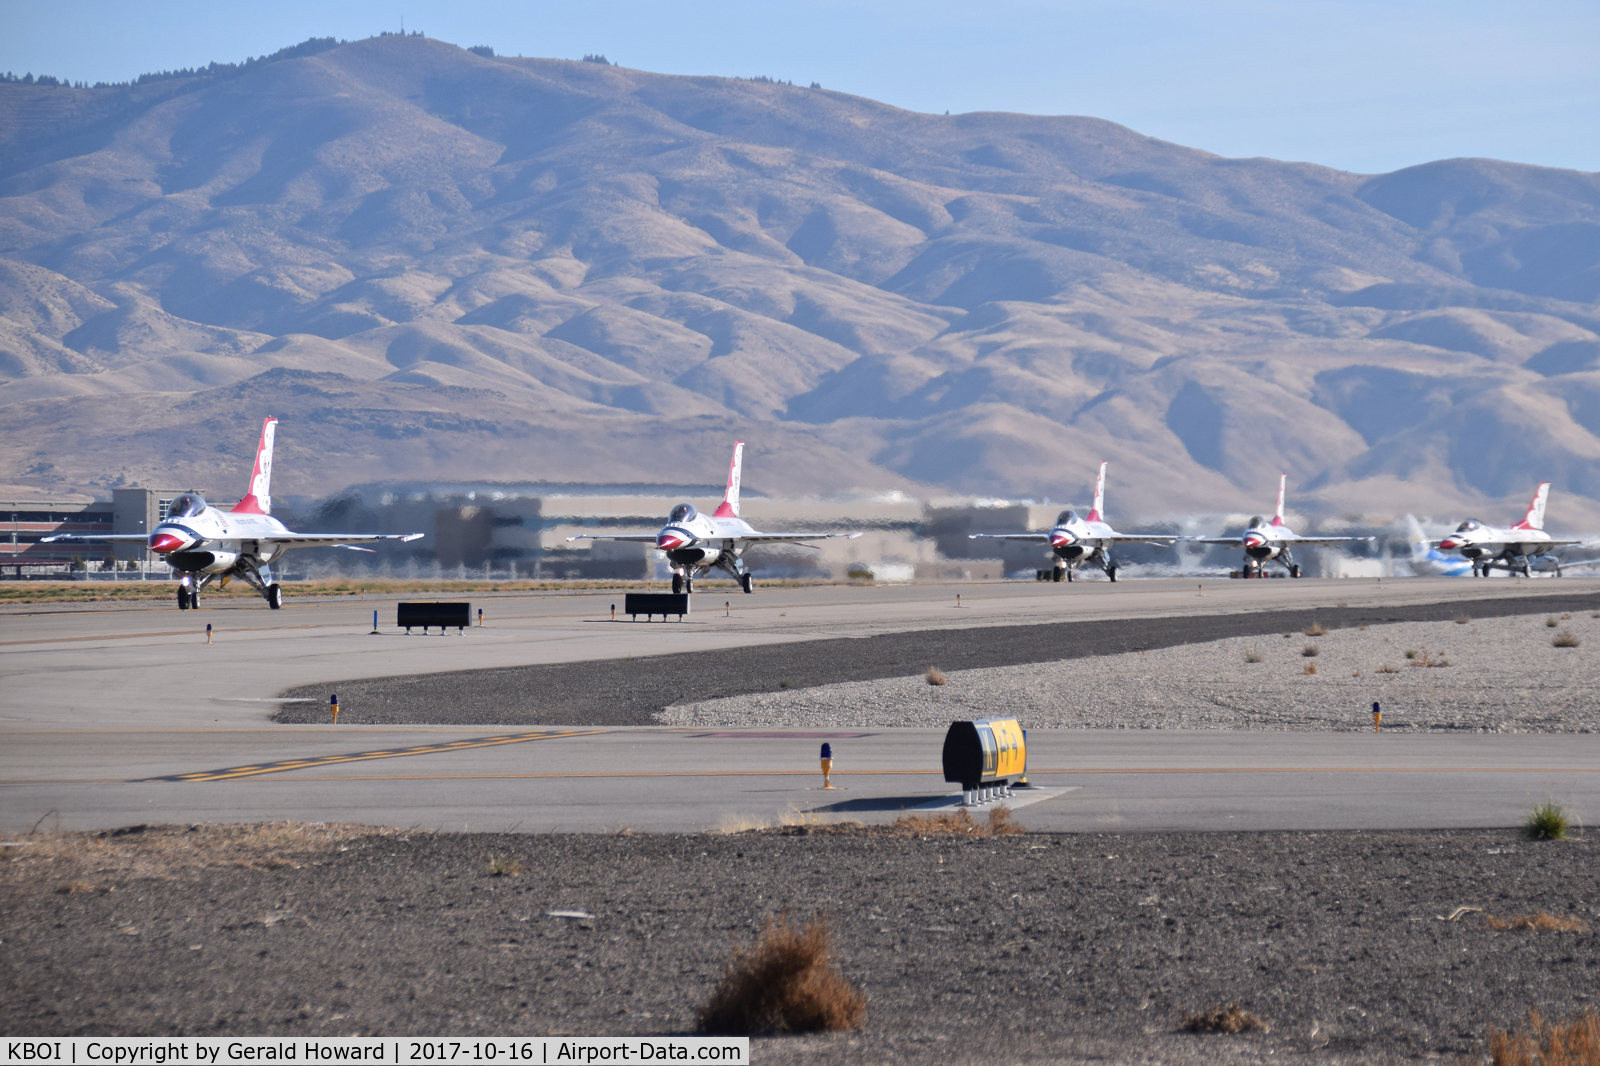 Boise Air Terminal/gowen Fld Airport (BOI) - Members of Thunderbirds taxiing on Foxtrot for RWY 10R. Flew in the Gowen Field air show during the weekend.